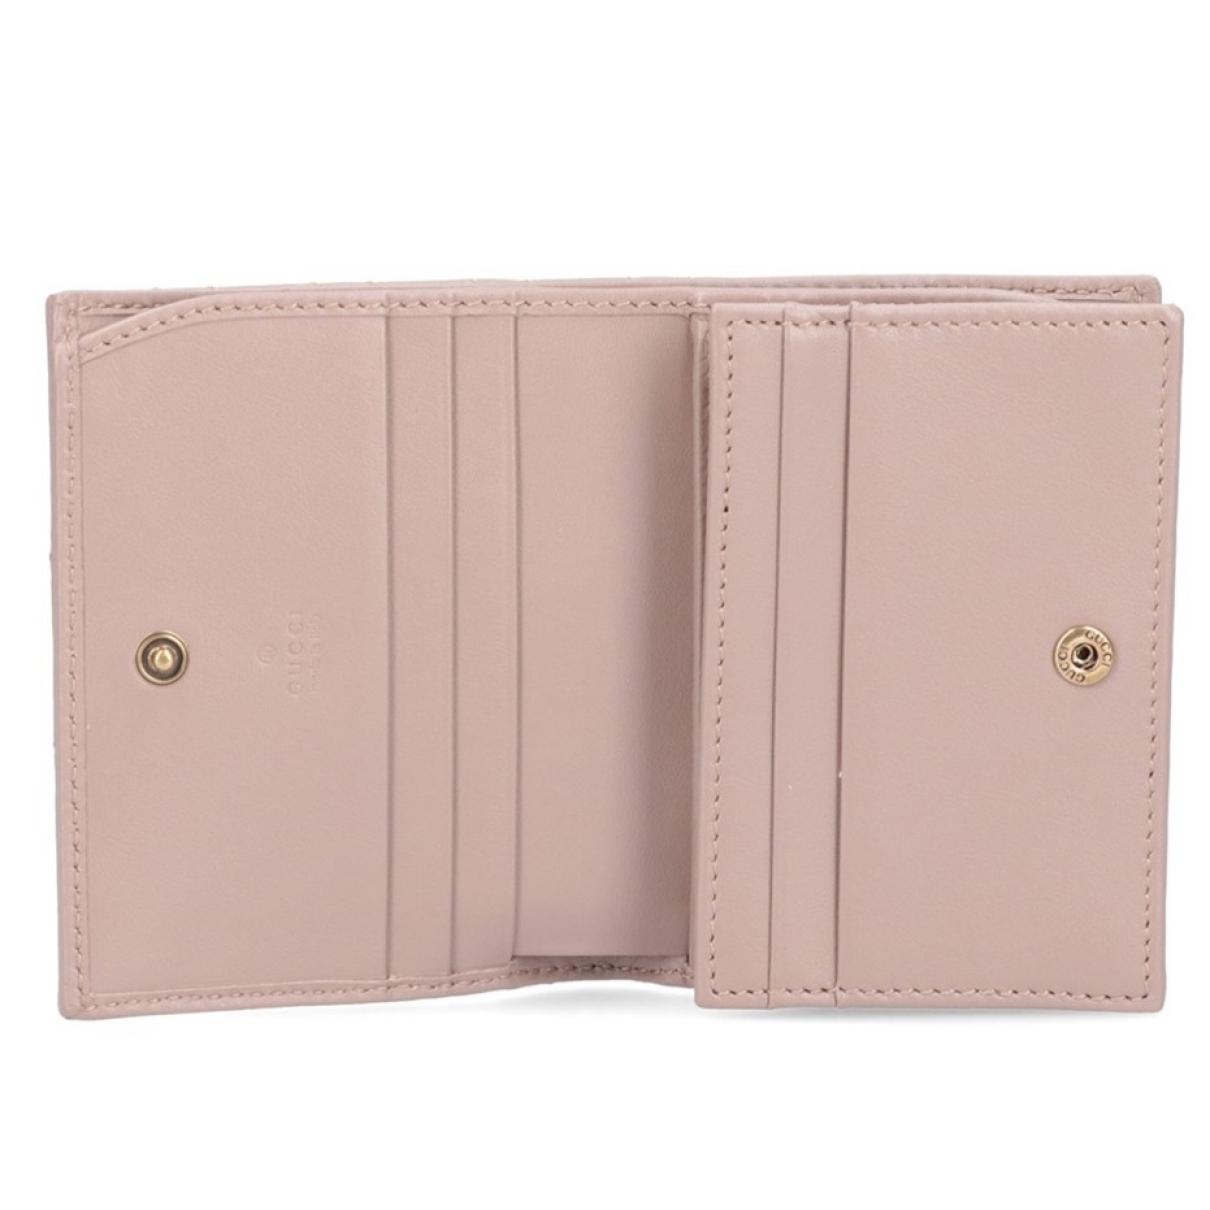 Marmont leather card wallet - 3